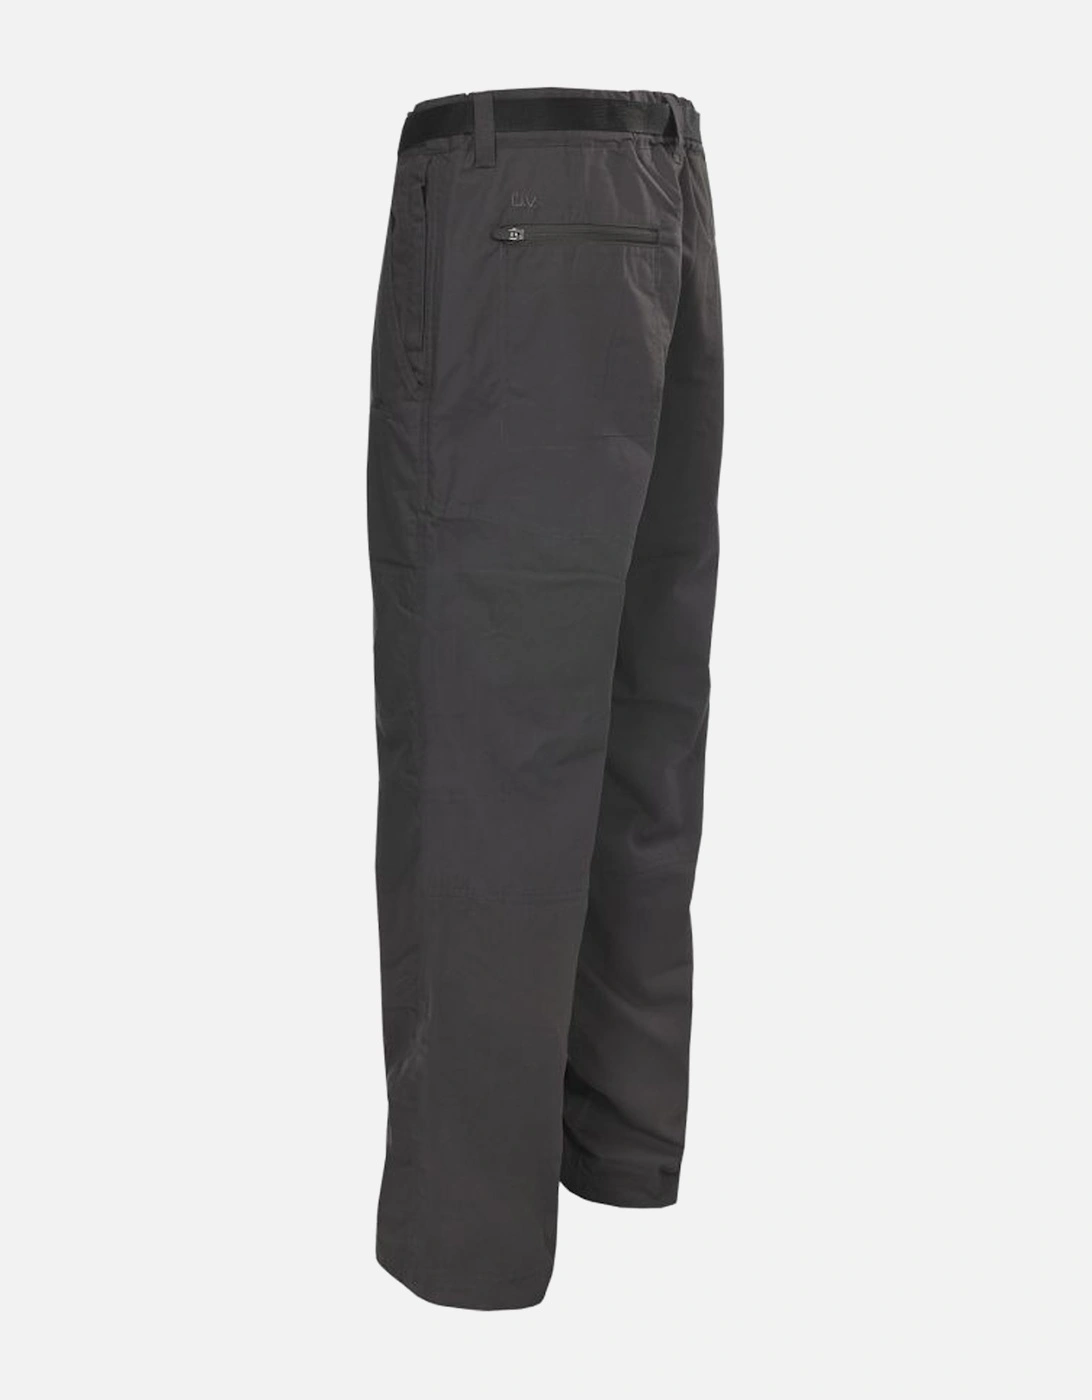 Mens Clifton Thermal Action Trousers